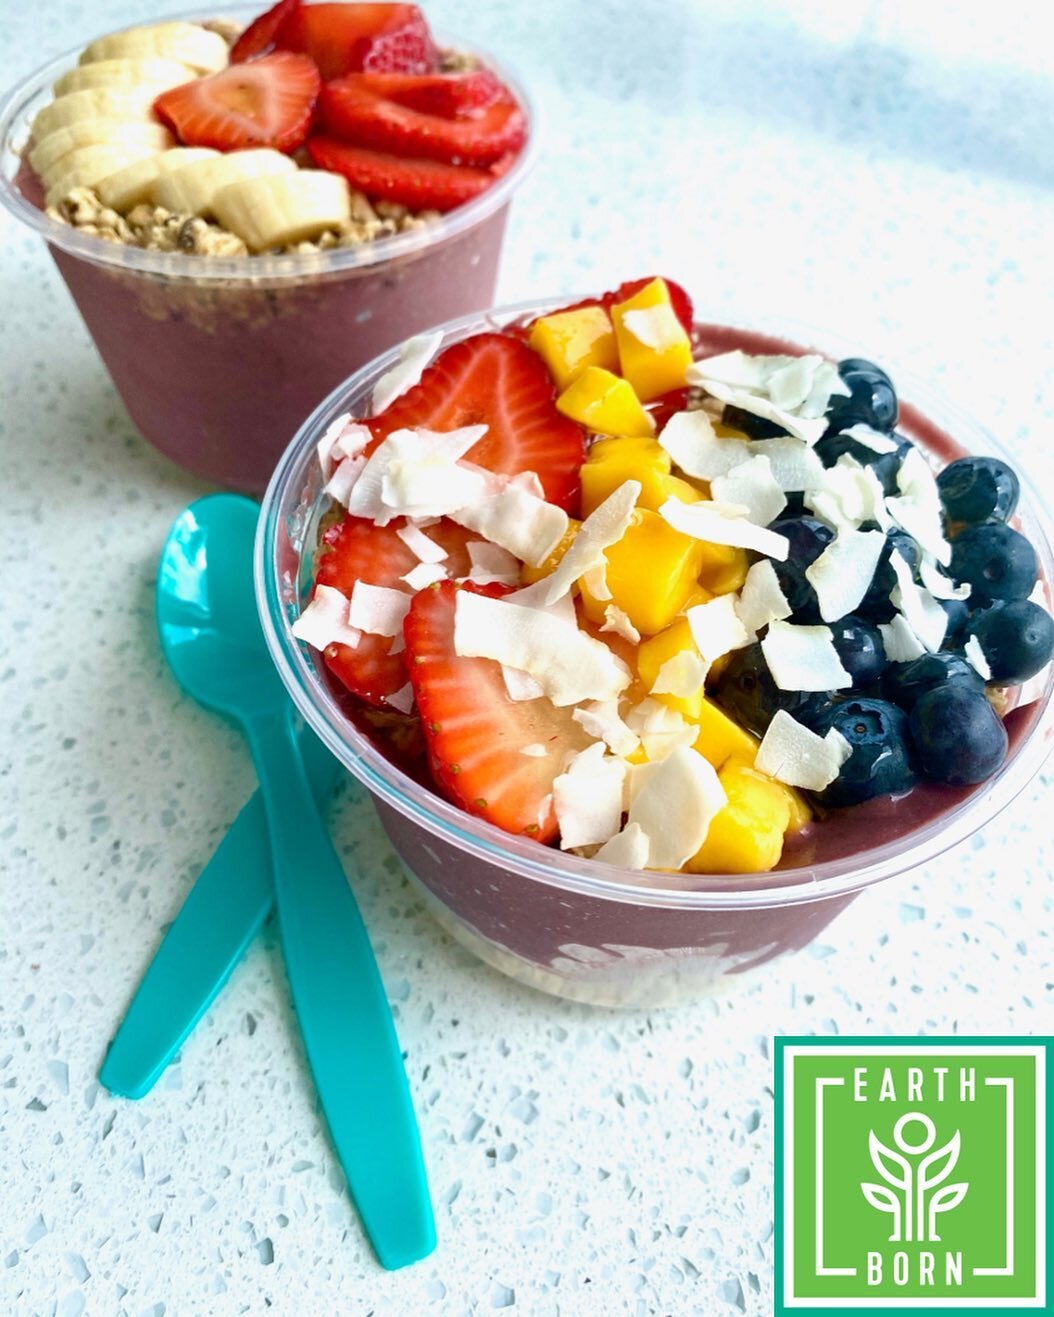 It&rsquo;s a great time for an acai or pitaya bowl. You will feel fantastic inside and out. Enjoy!